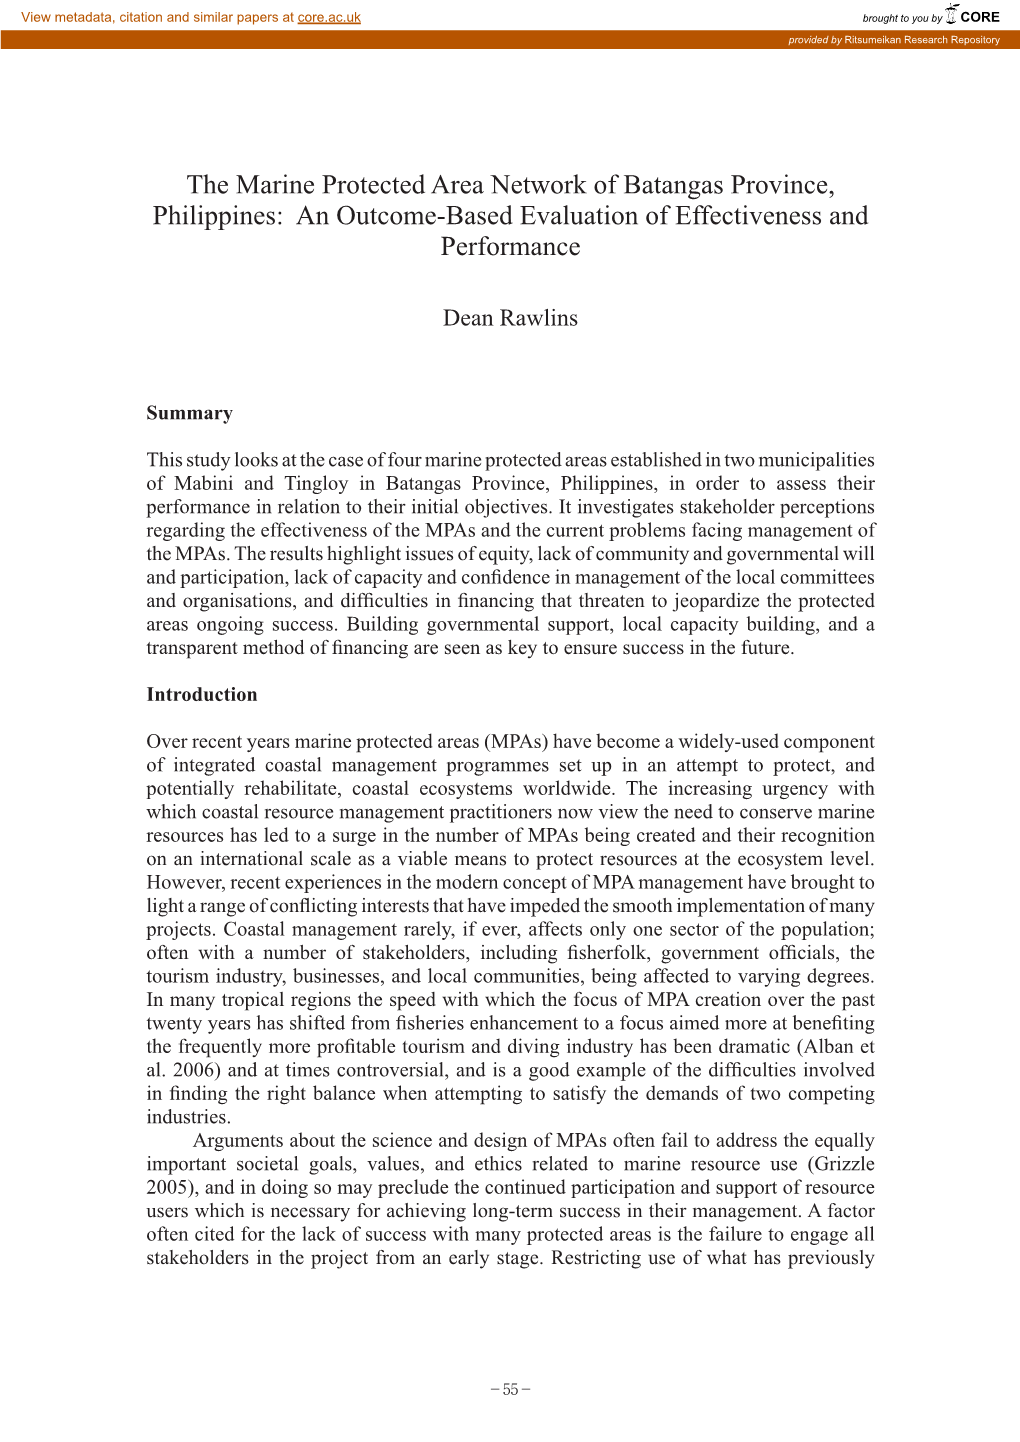 The Marine Protected Area Network of Batangas Province, Philippines: an Outcome-Based Evaluation of Effectiveness and Performance